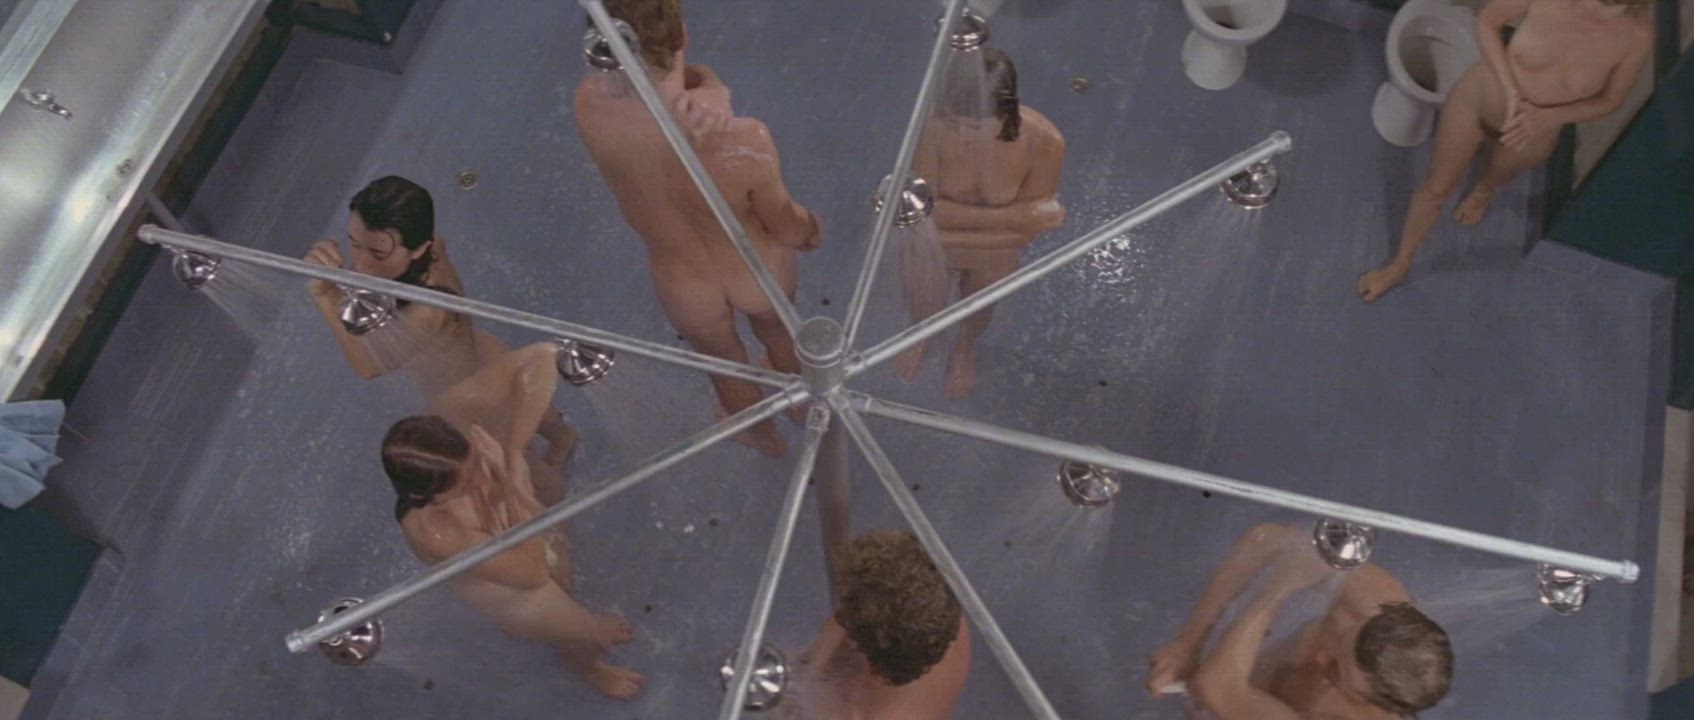 In a dystopian/totalitarian world, co-ed communal showers is very normal (Olivia